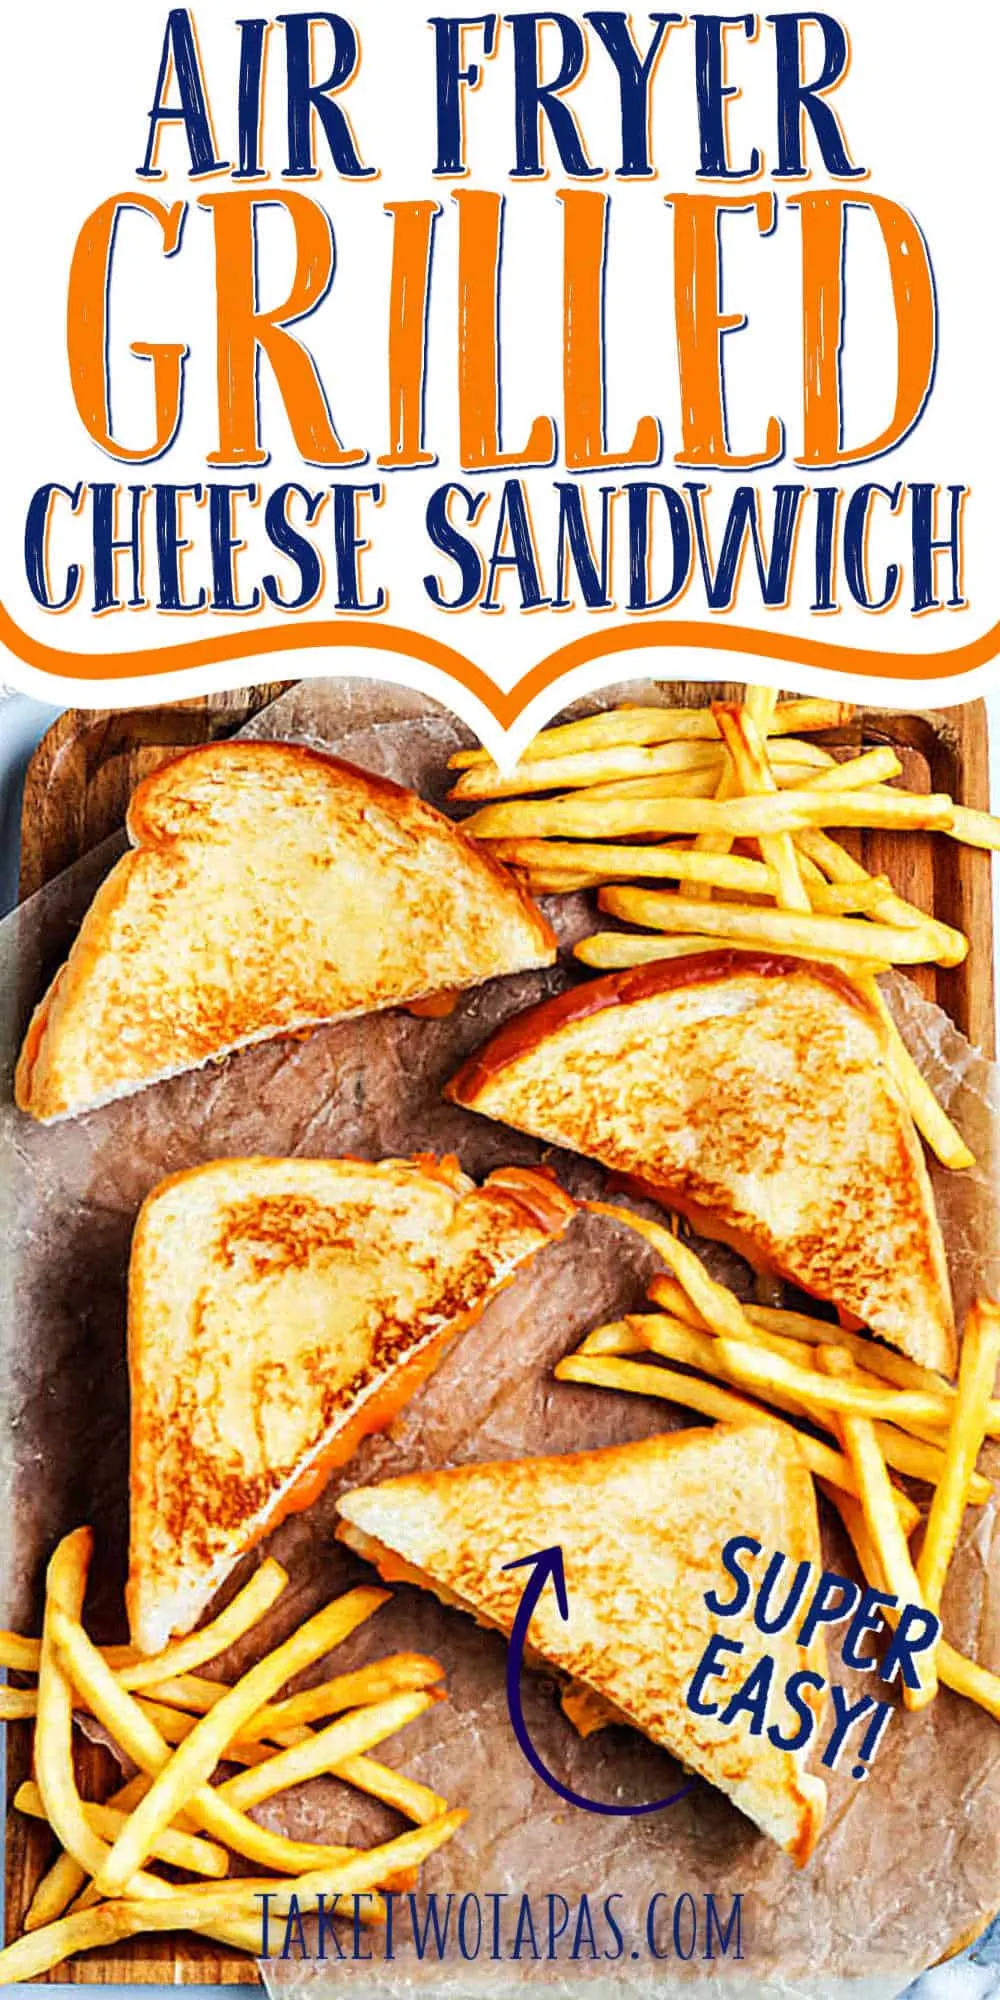 sandwiches and fries with text "air fryer grilled cheese sandwich"